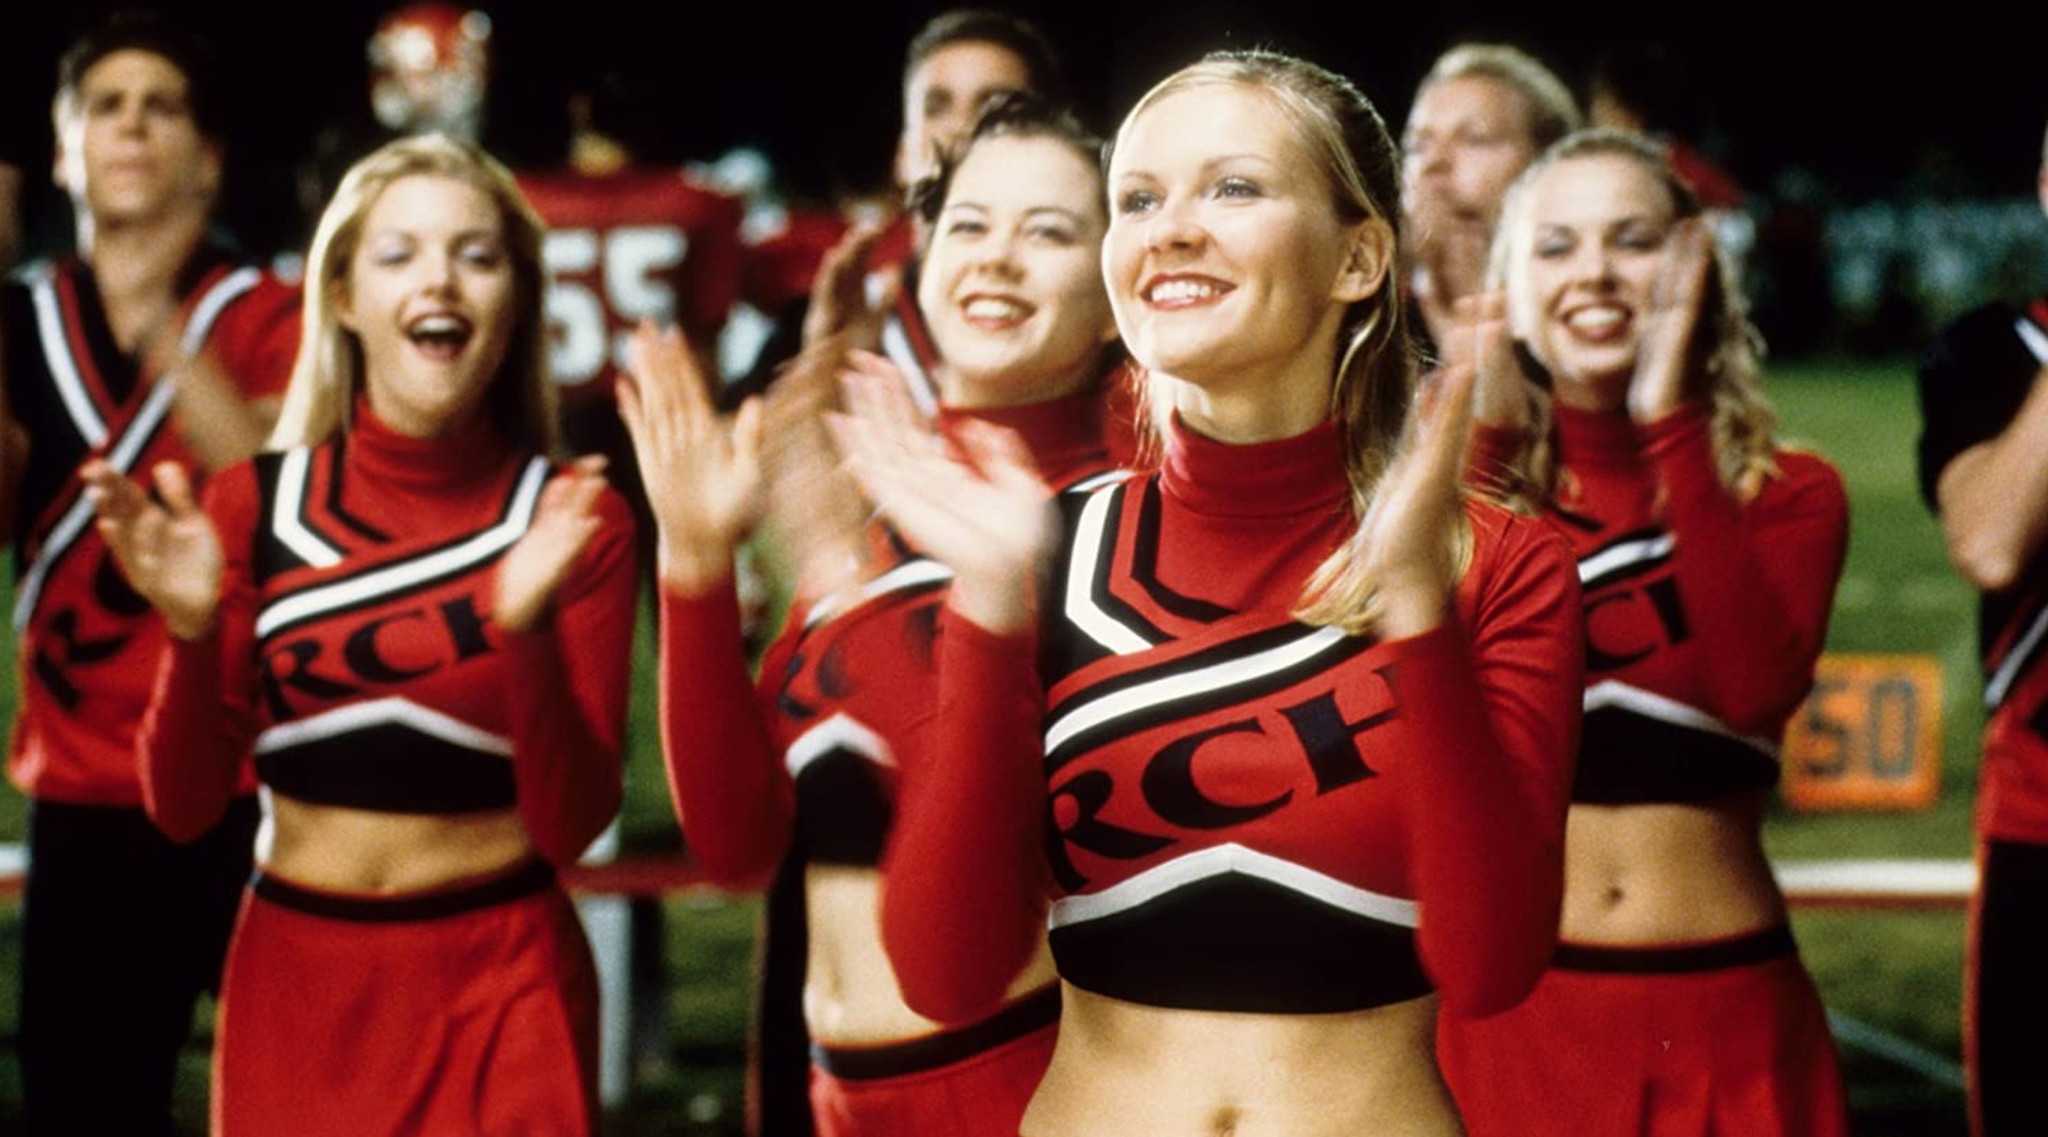 Director Peyton Reed Reflects on “Bring It On,” 20 Years Later